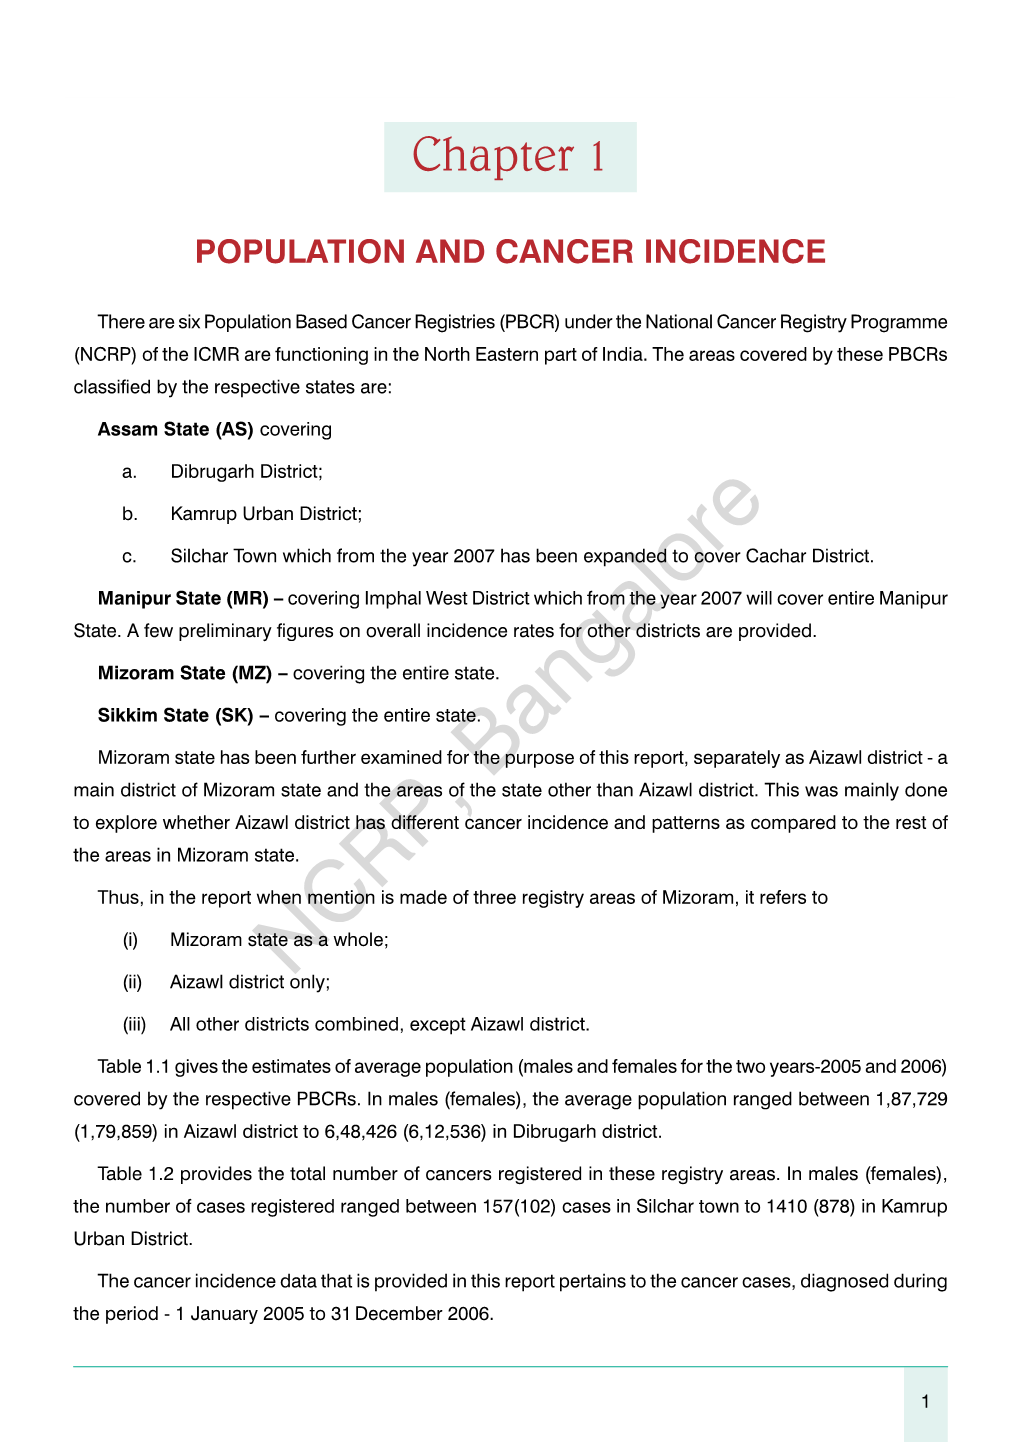 Population and Cancer Incidence